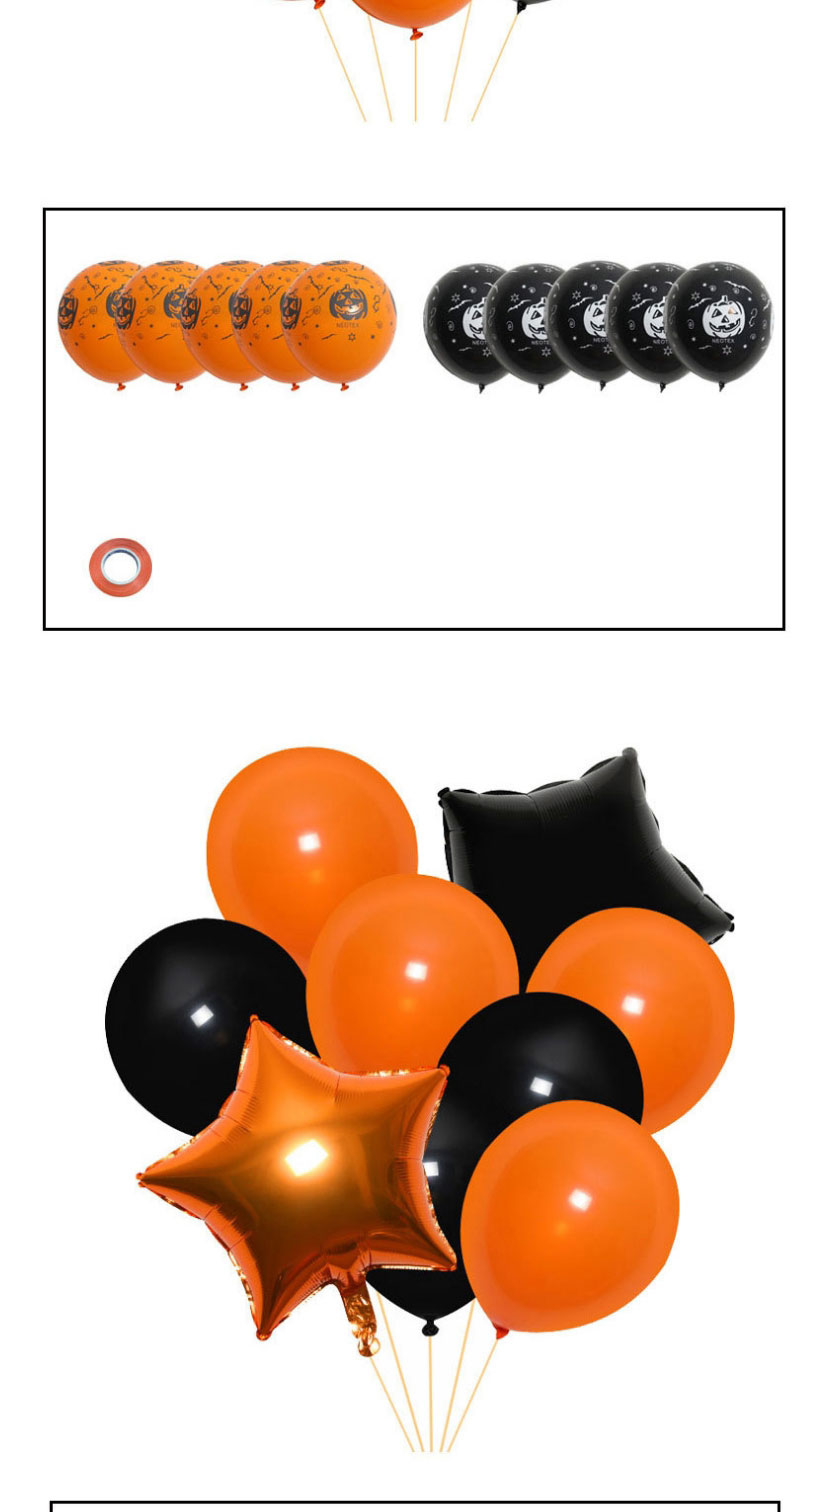 Fashion Balloon Combination 4 Halloween Printing Thickened Balloon Set,Festival & Party Supplies